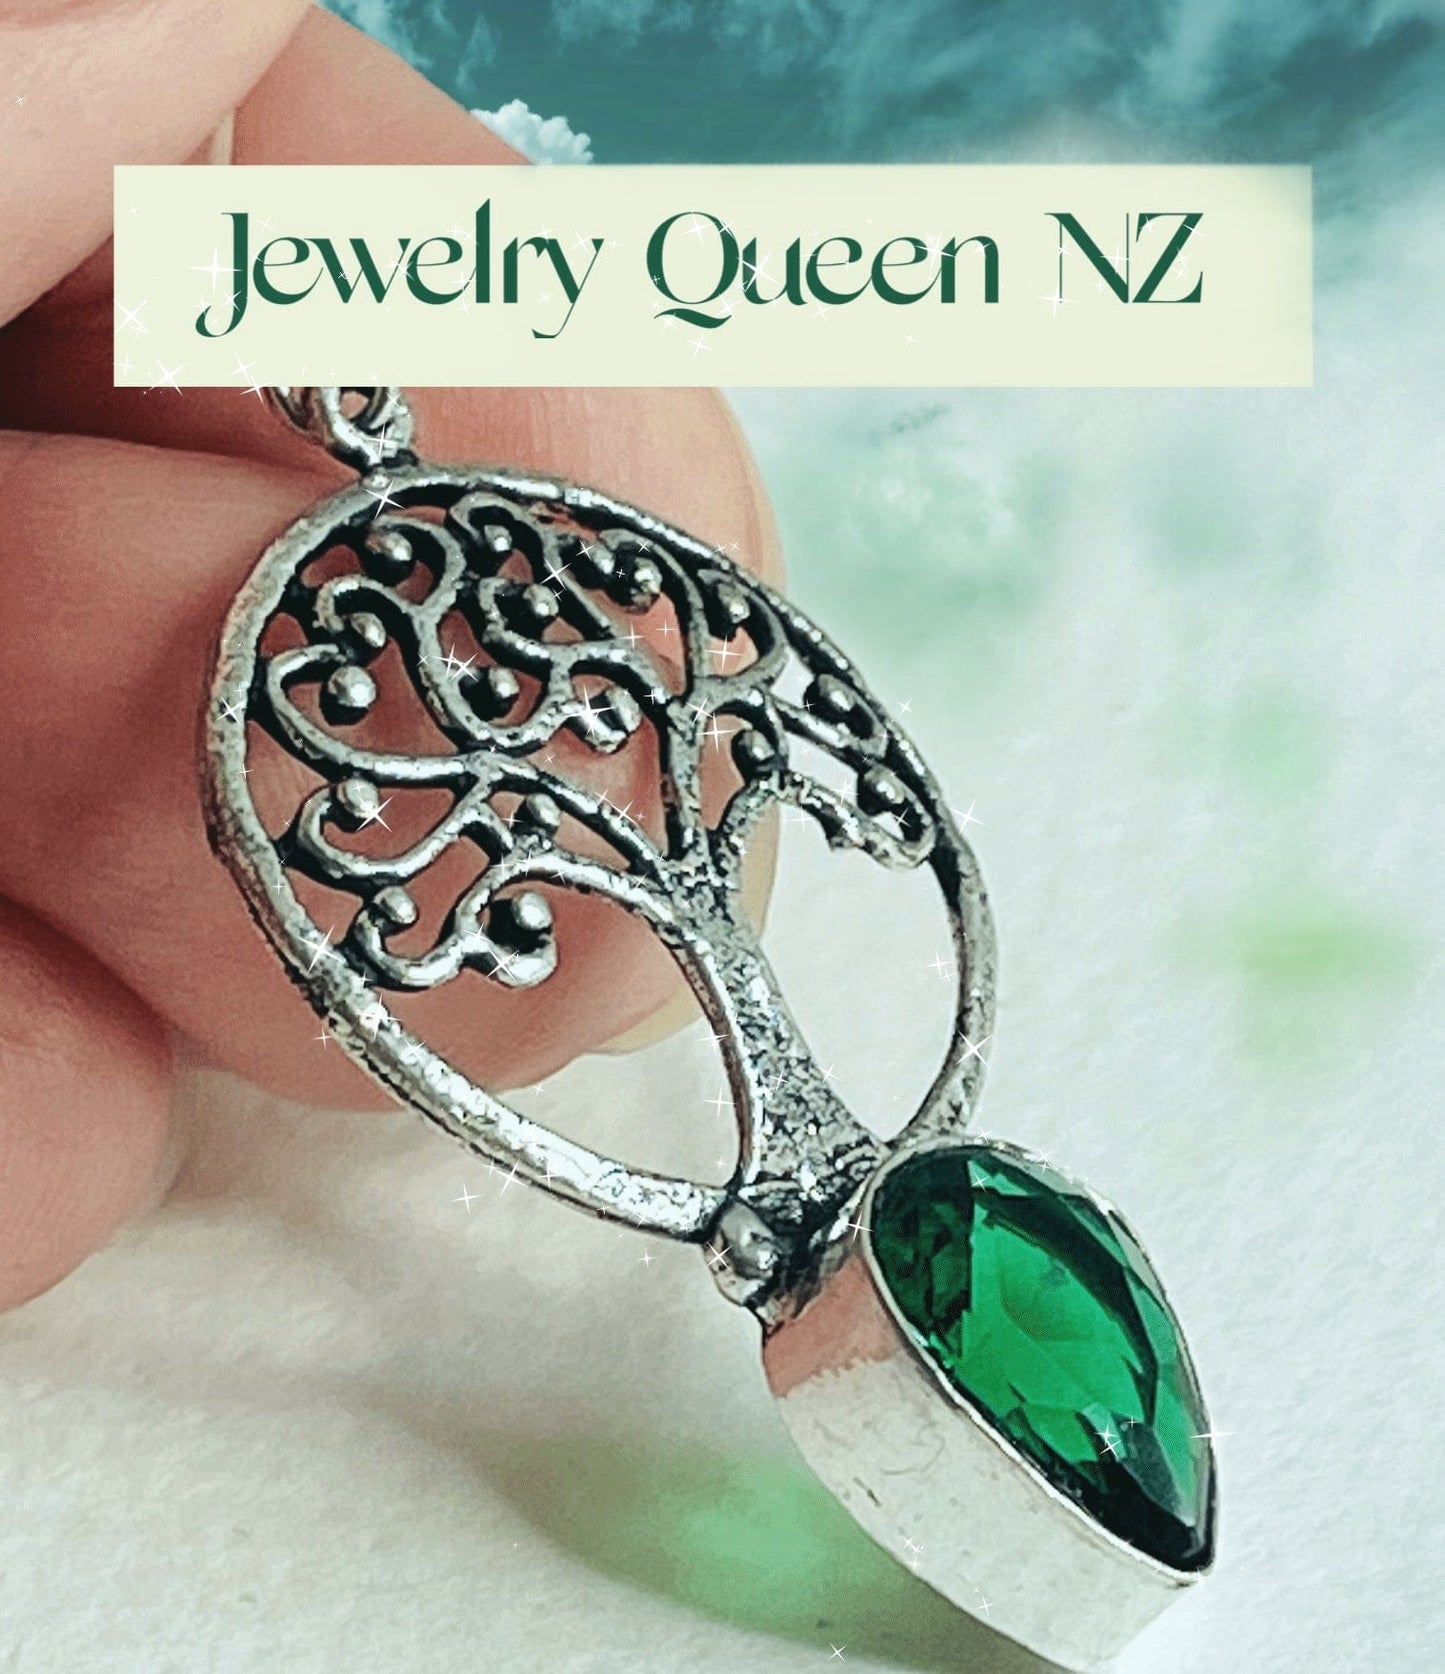 Tree of Life earrings and Cross pendant and earrings set - Chrome Diopside Jewelry Sets